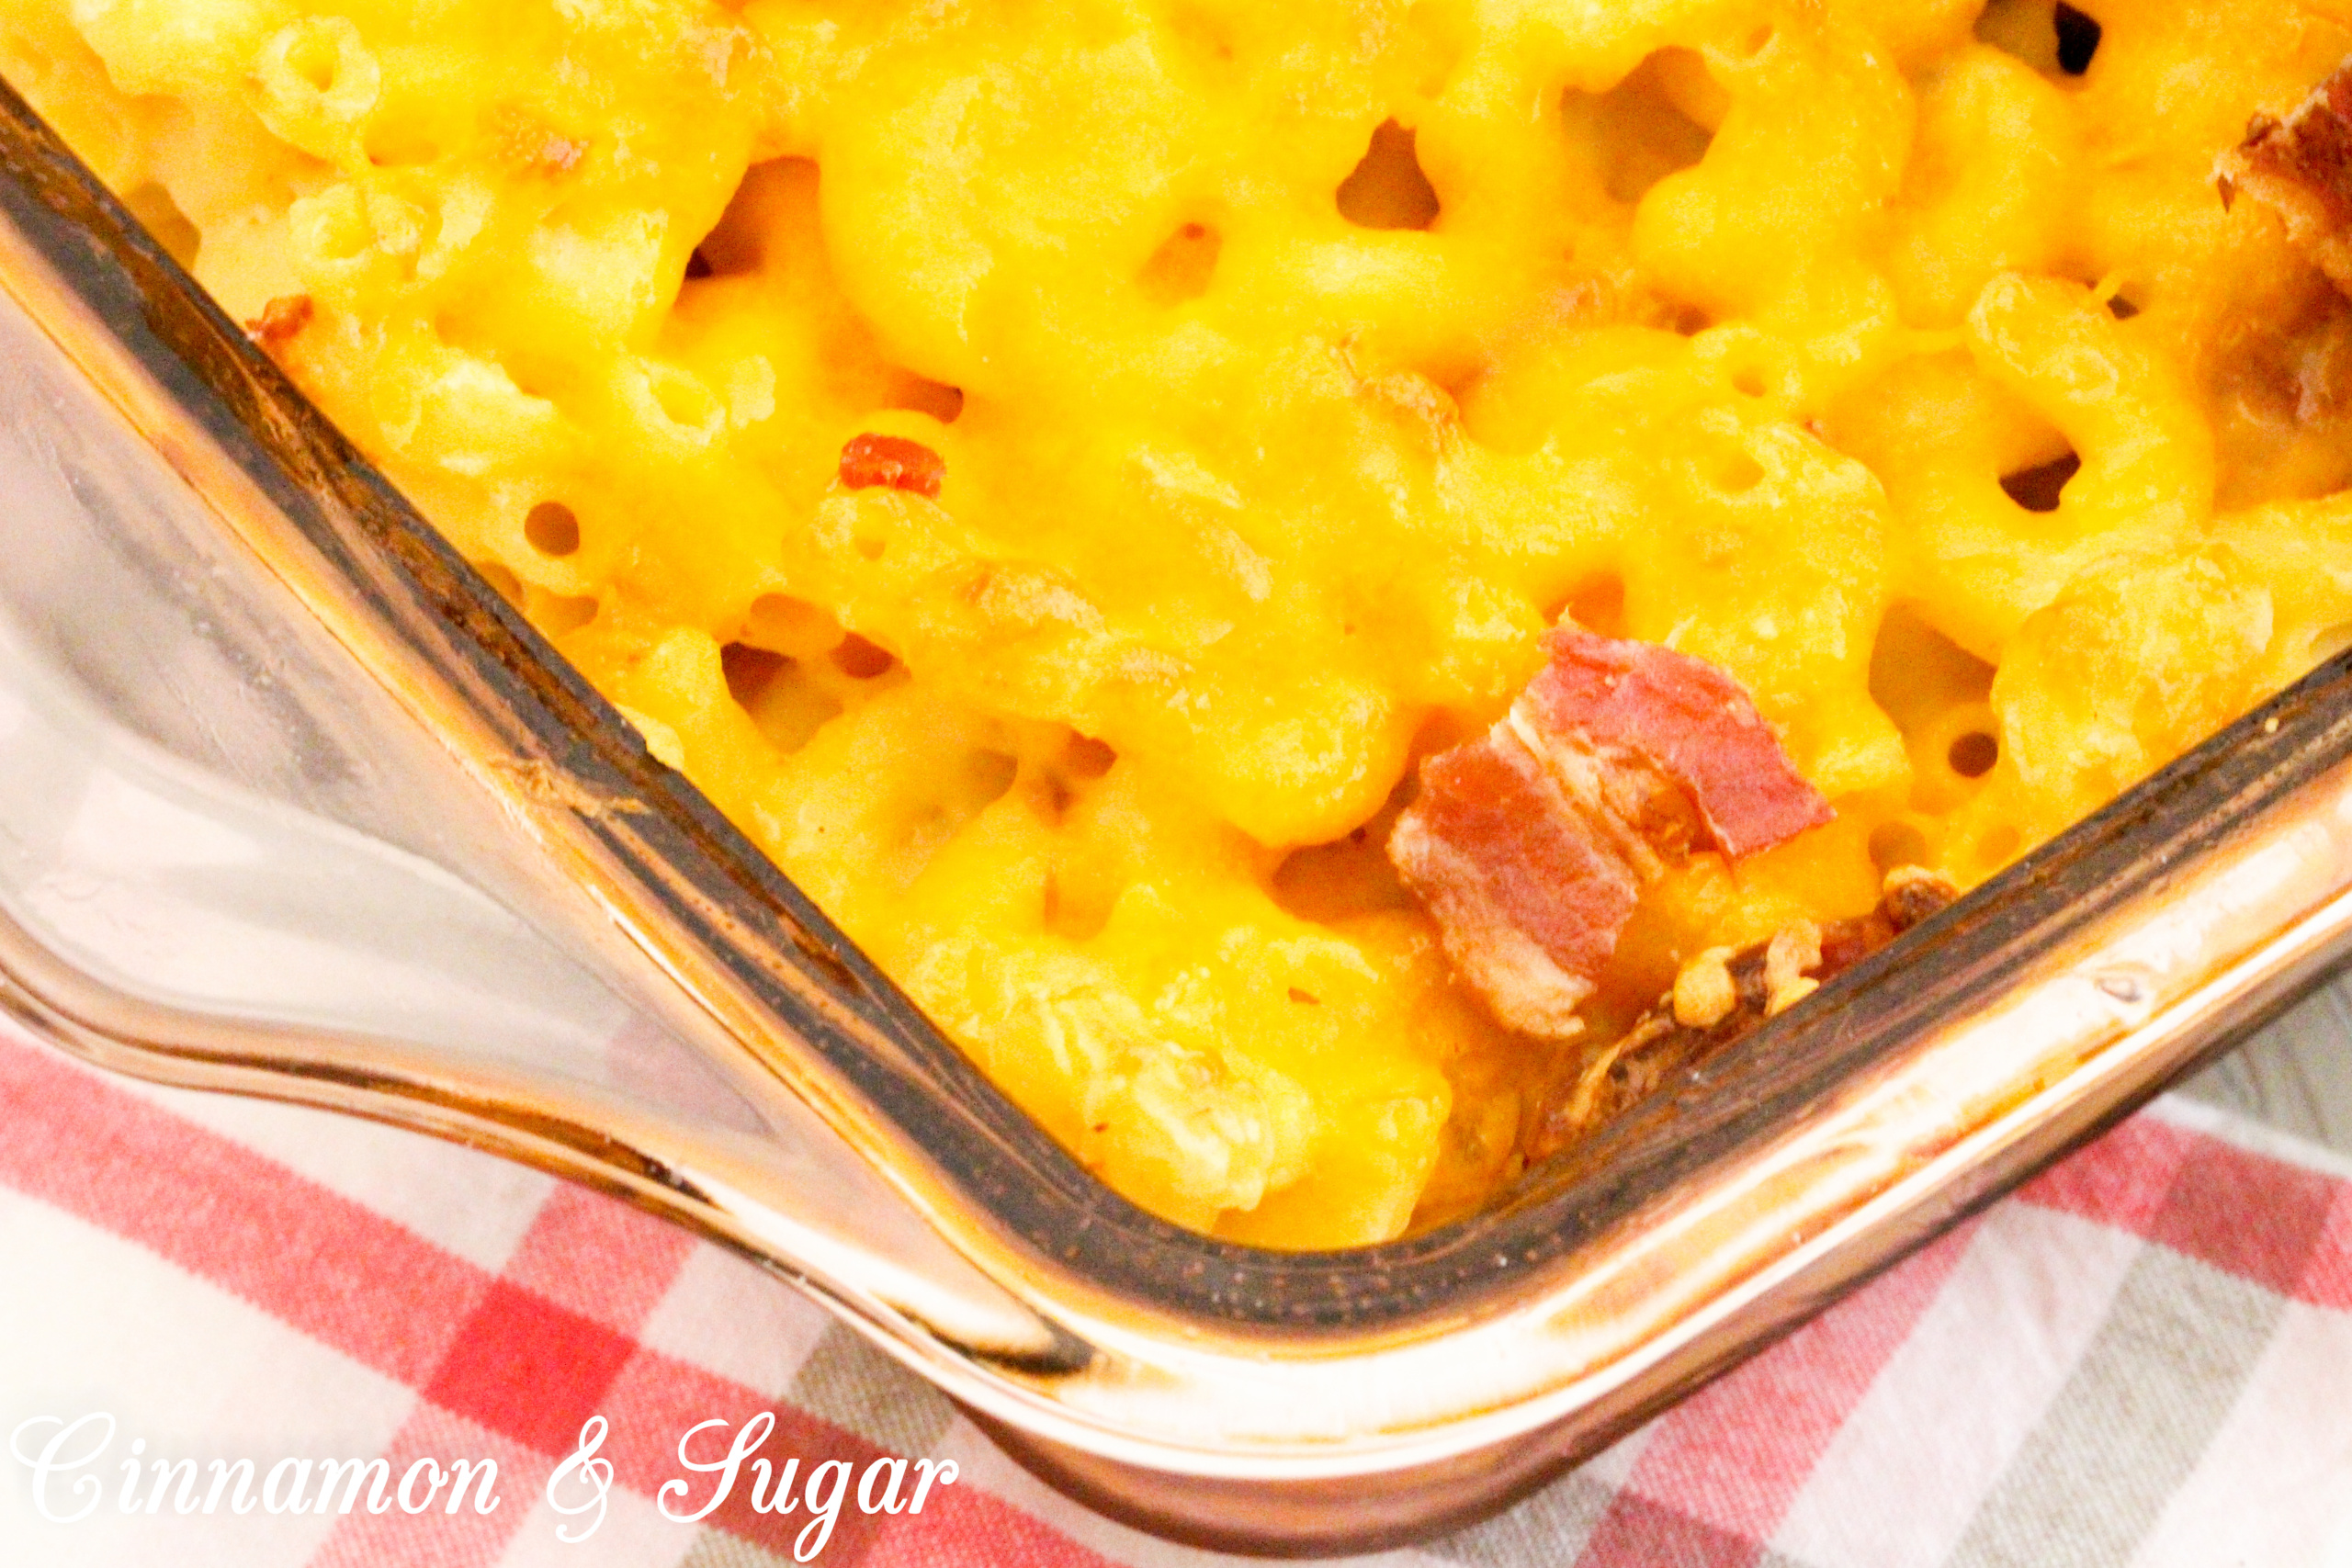 Missi's Mac and Cheese is rich, without the use of heavy cream and has plenty of flavor thanks to the addition of crisp, smoky bacon. Recipe shared with permission granted by Rosie A. Point, author of THE BURGER BAR MYSTERIES.